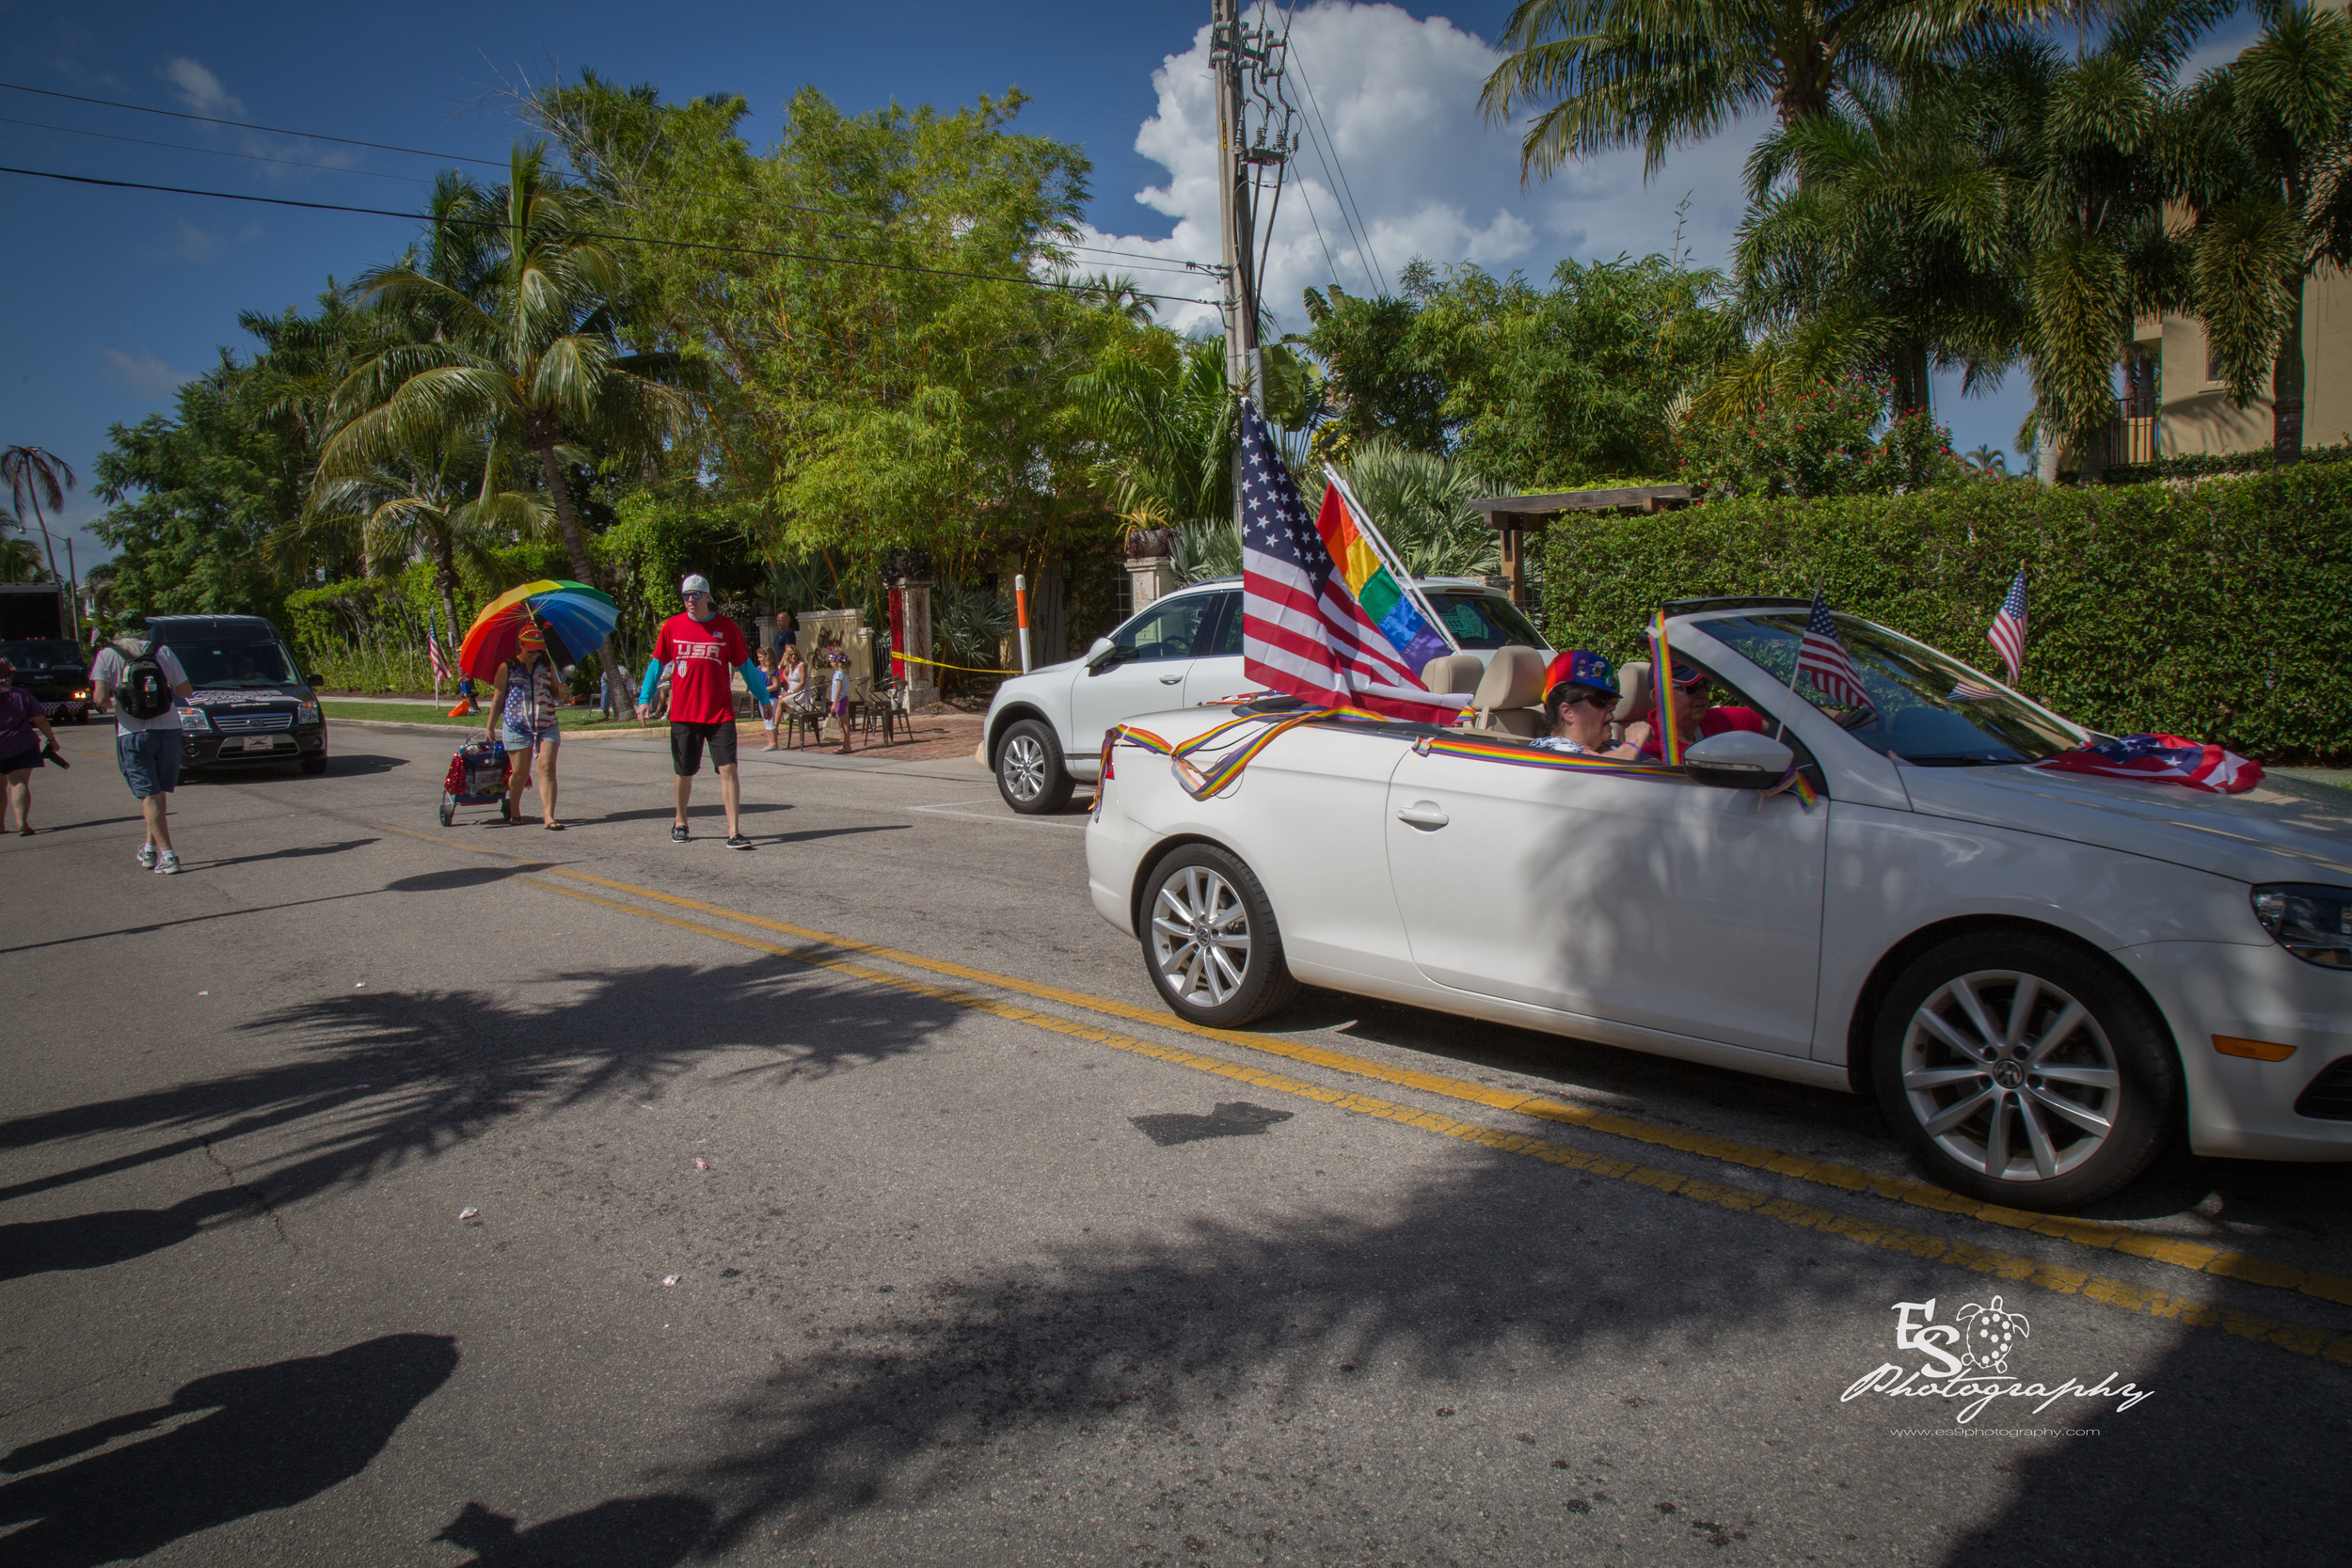 City of Naples July 4th Parade 2016 @ ES9 Photography 2016-131.jpg